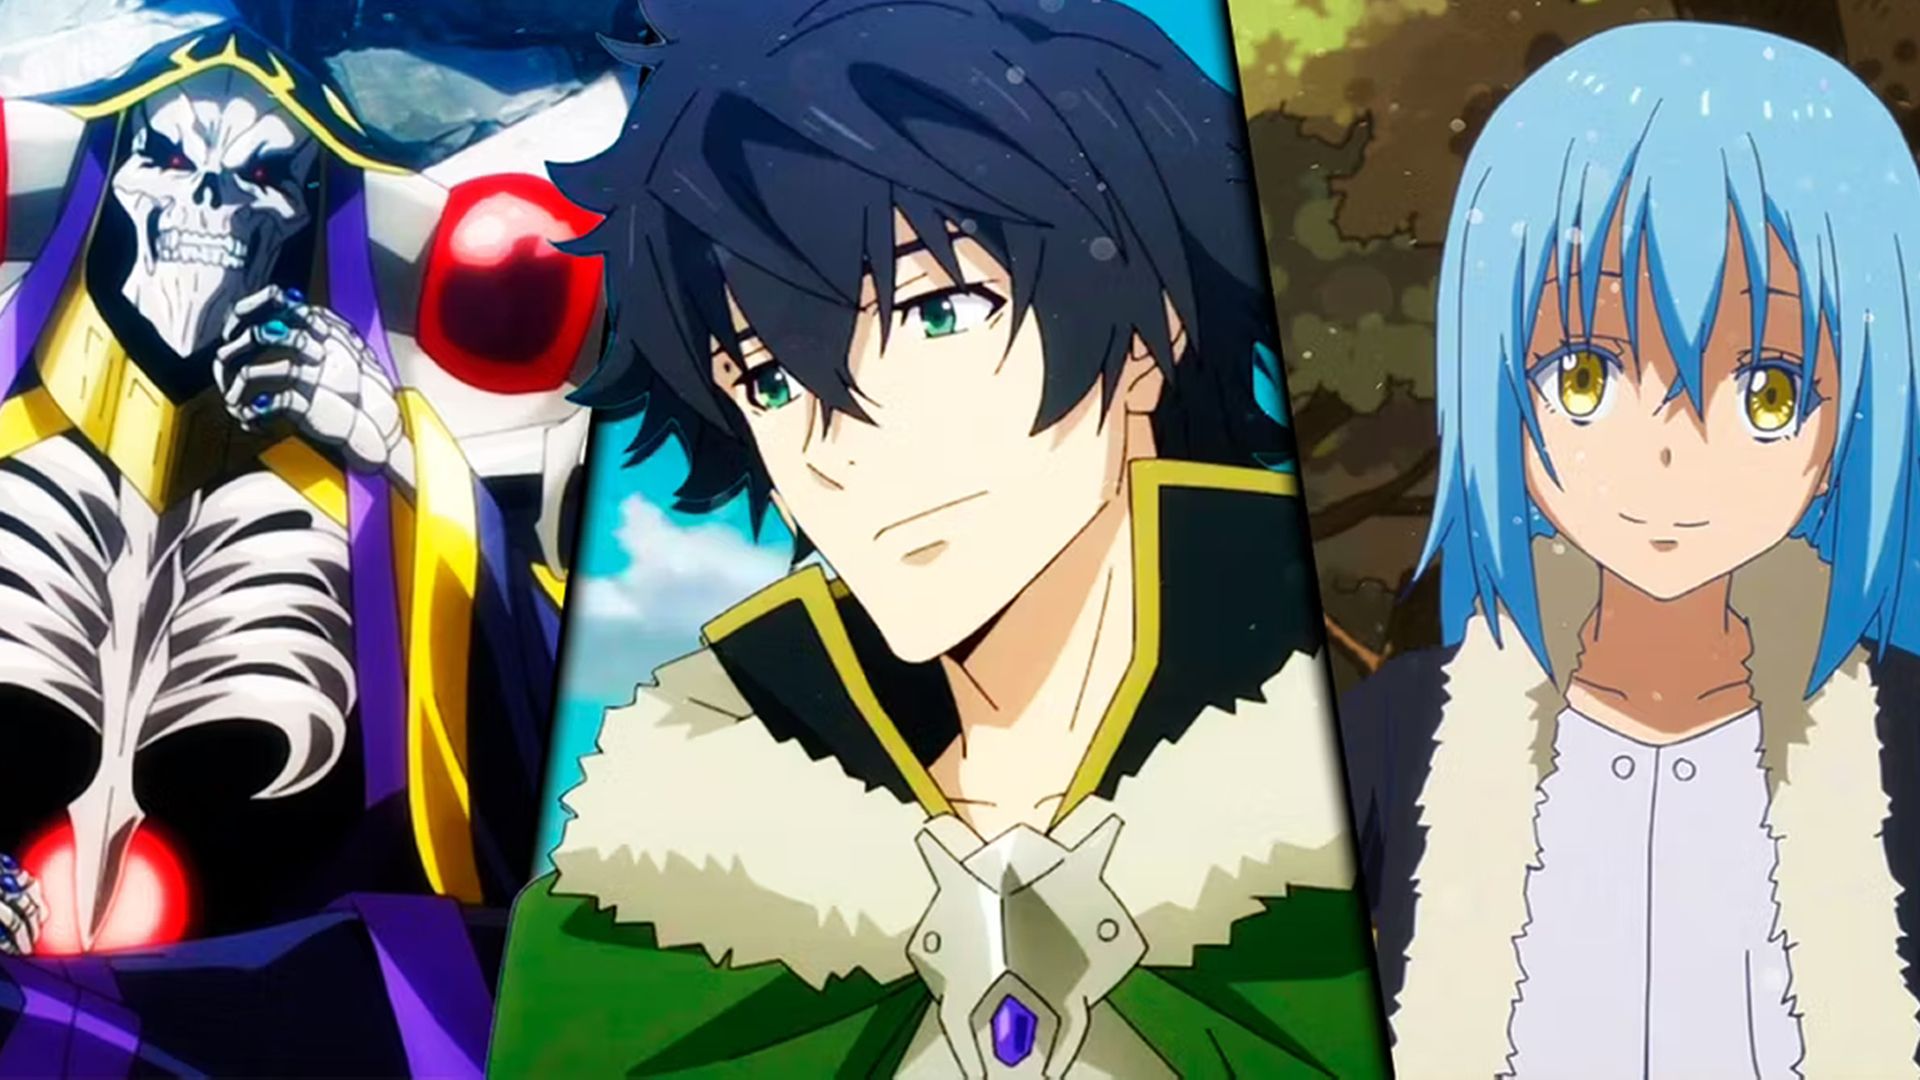 10 Most Overpowered Isekai Anime Protagonists, Ranked